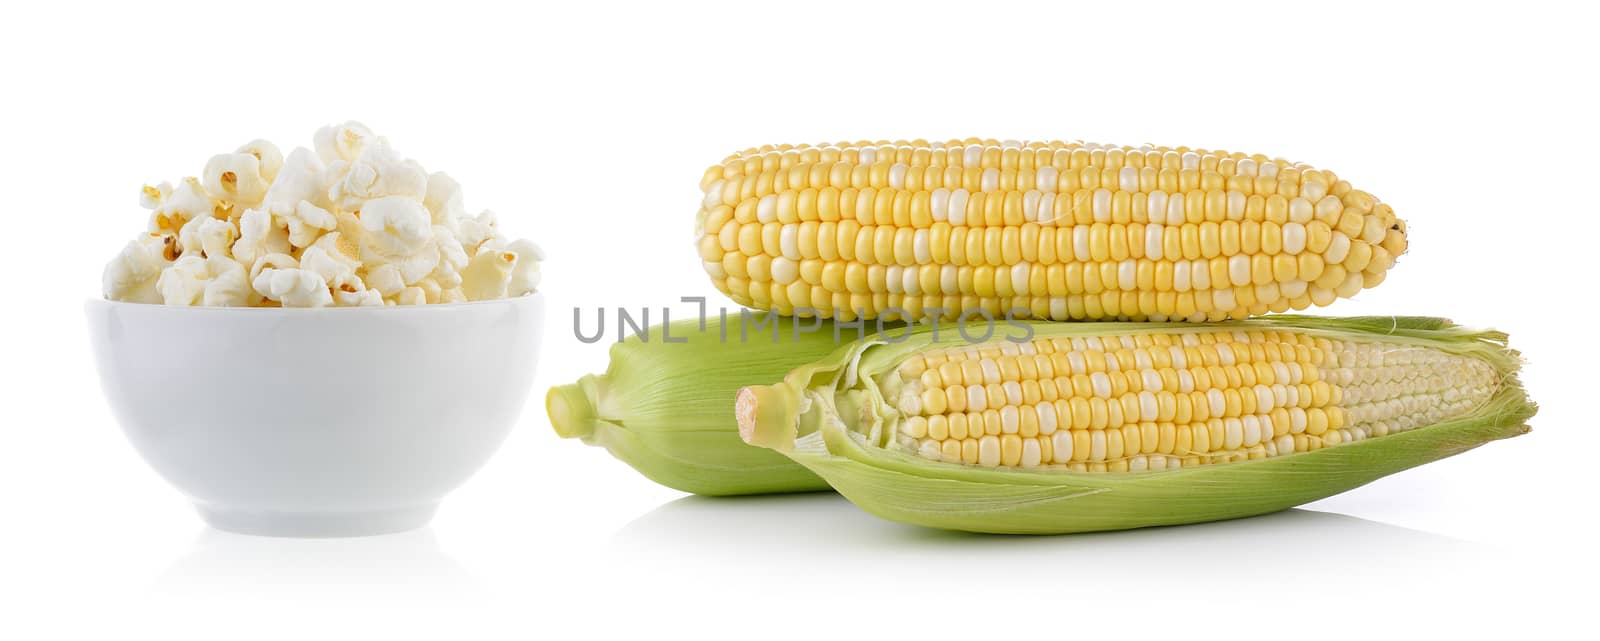 popcorn in bowl and corn isolated on white background by sommai